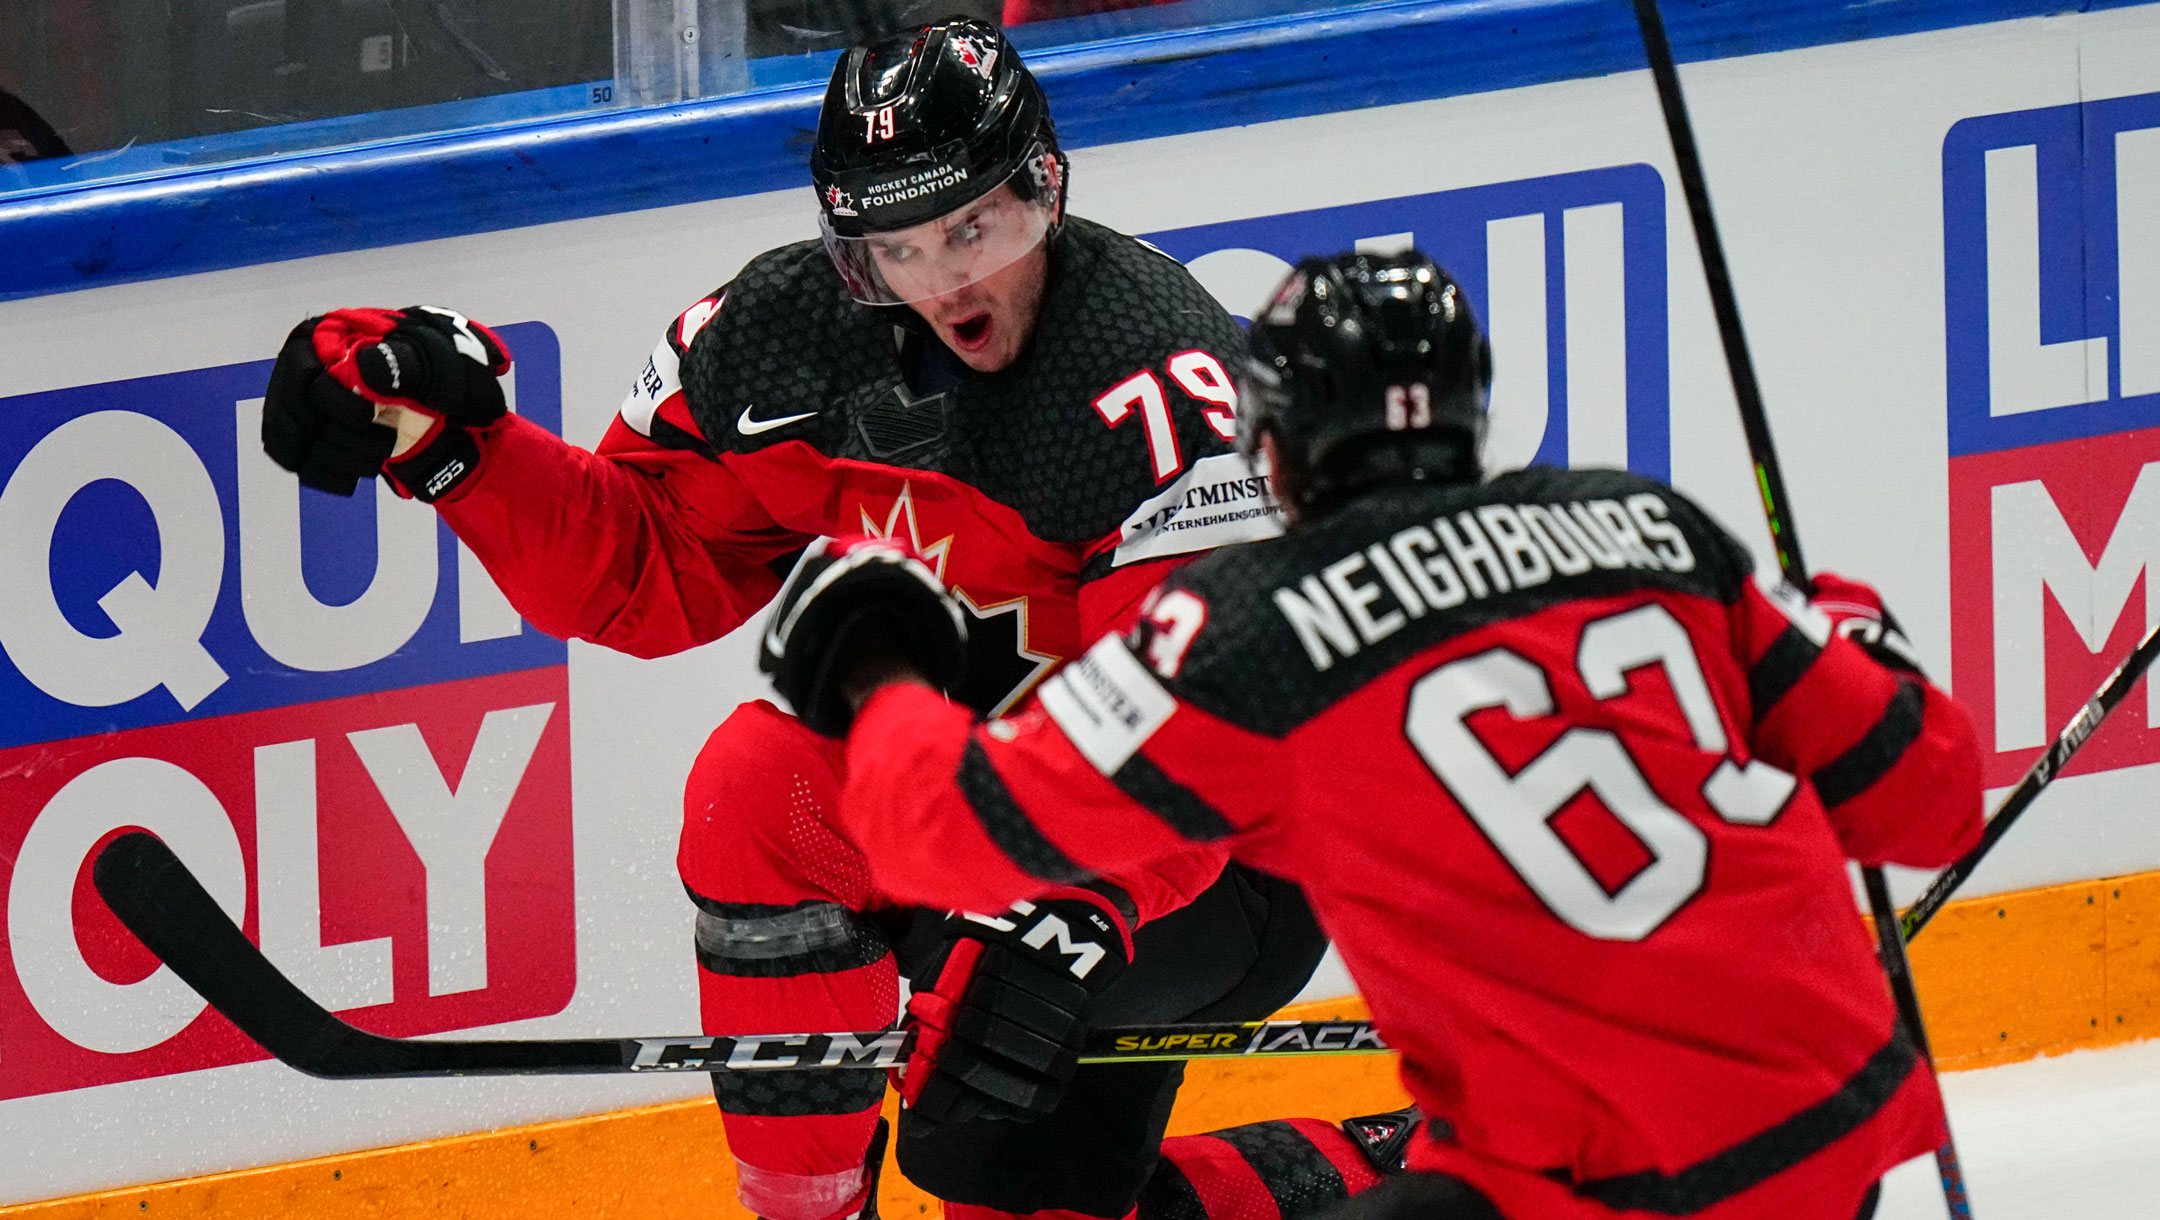 Team Canada to play for gold at IIHF World Championship - Team Canada